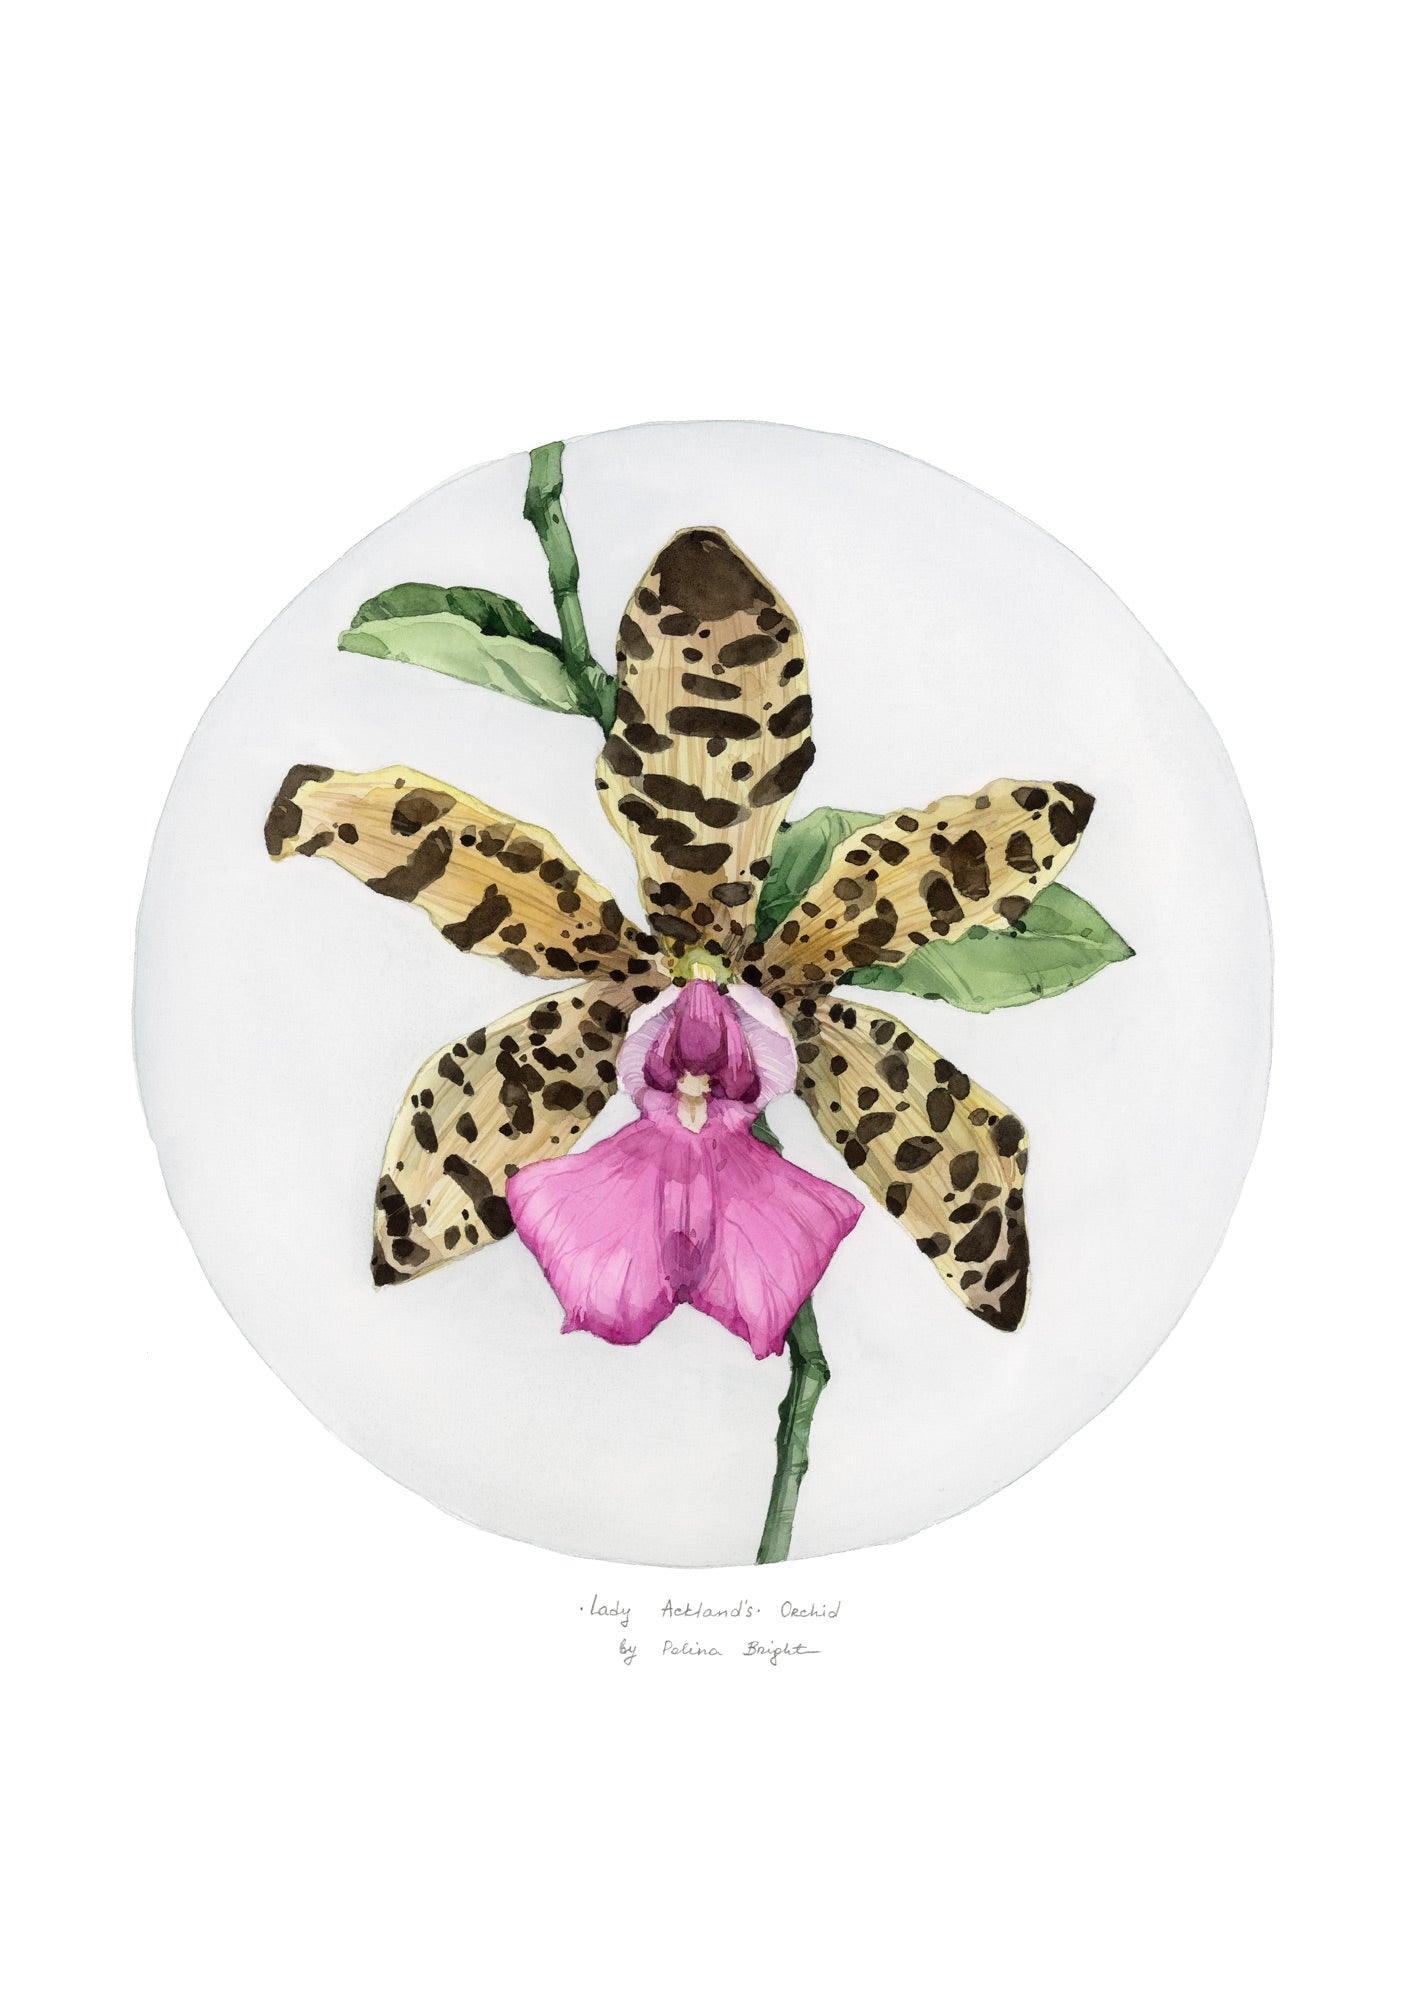 Lady Ackland's Orchid by Polina Bright